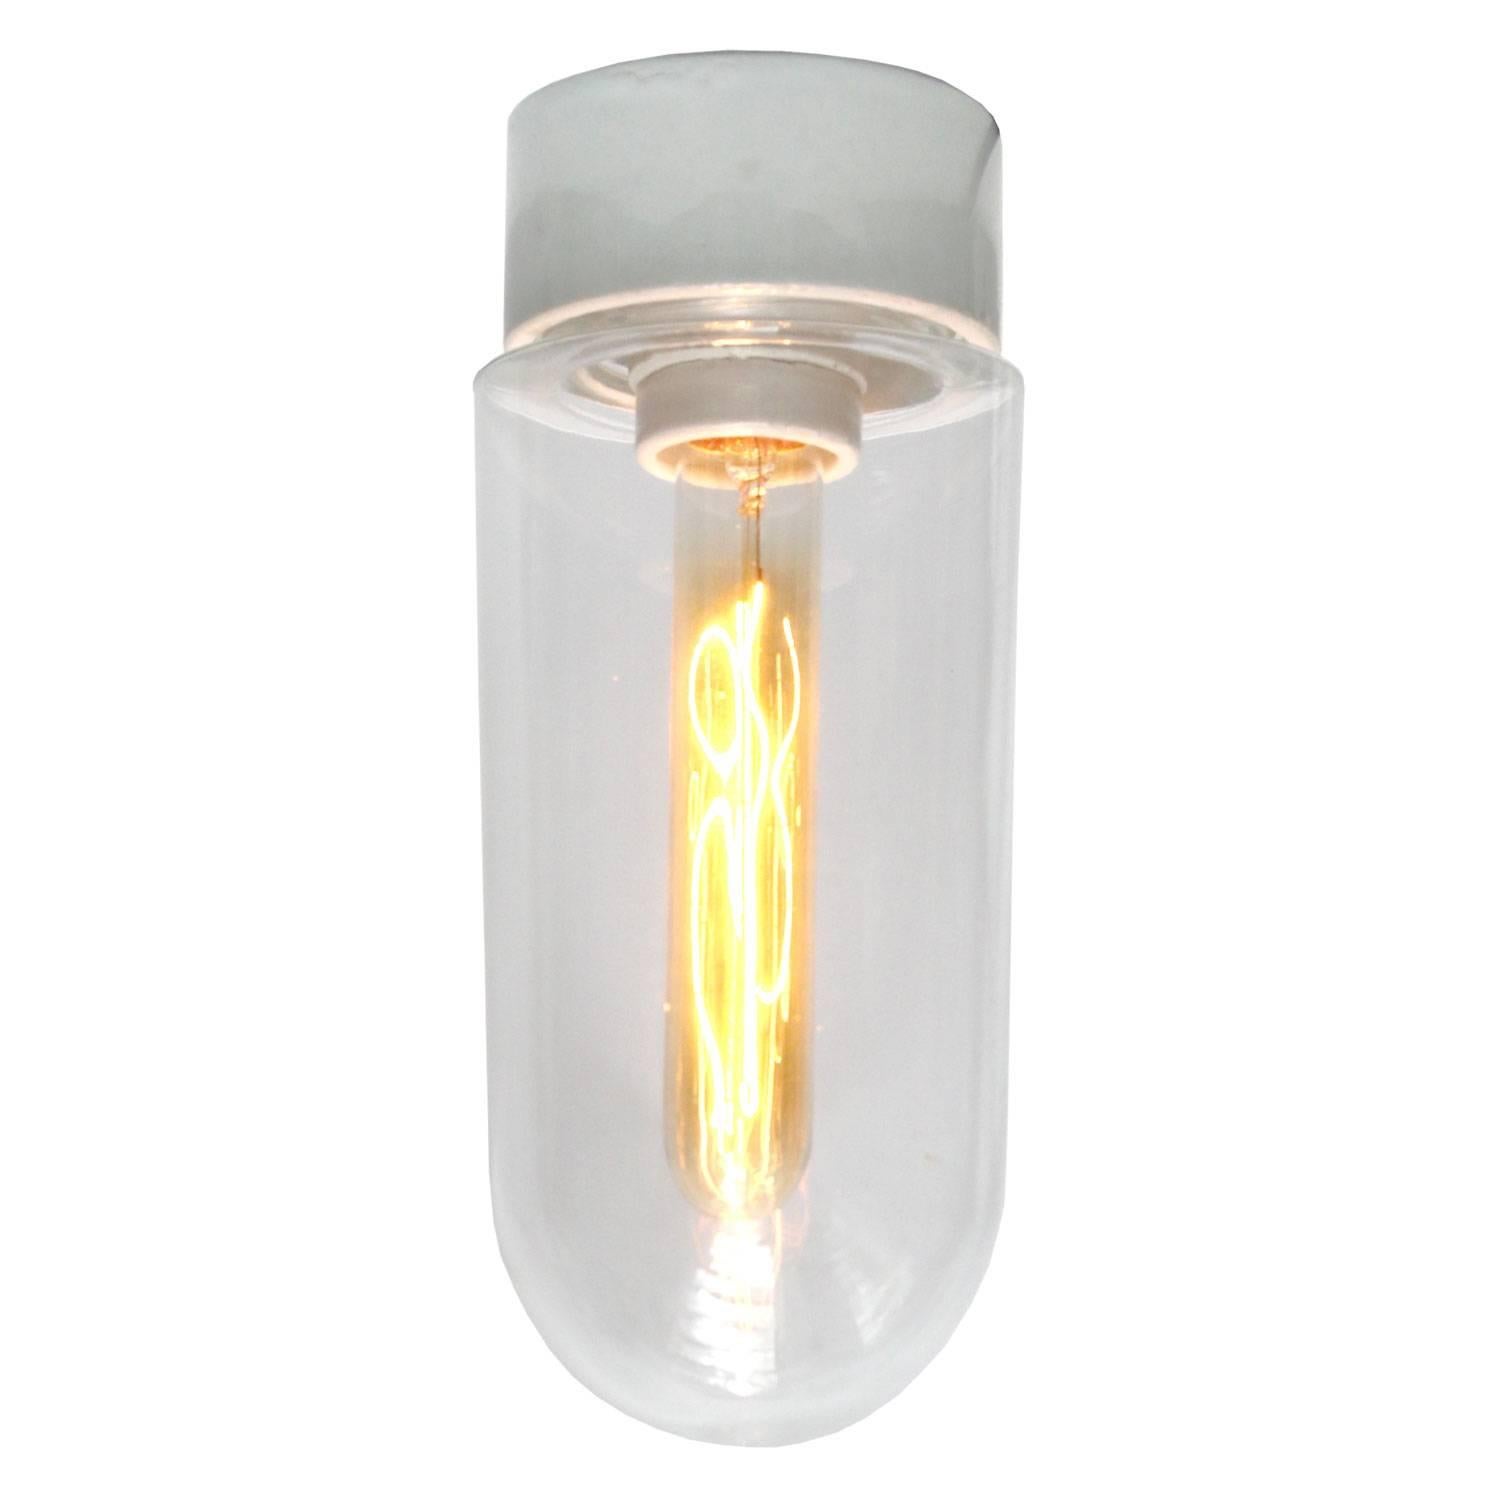 Industrial ceiling lamps. White porcelain. Clear glass.

Weight: 1.0 kg / 2.2 lb

Priced per individual item. All lamps have been made suitable by international standards for incandescent light bulbs, energy-efficient and LED bulbs. E26/E27 bulb